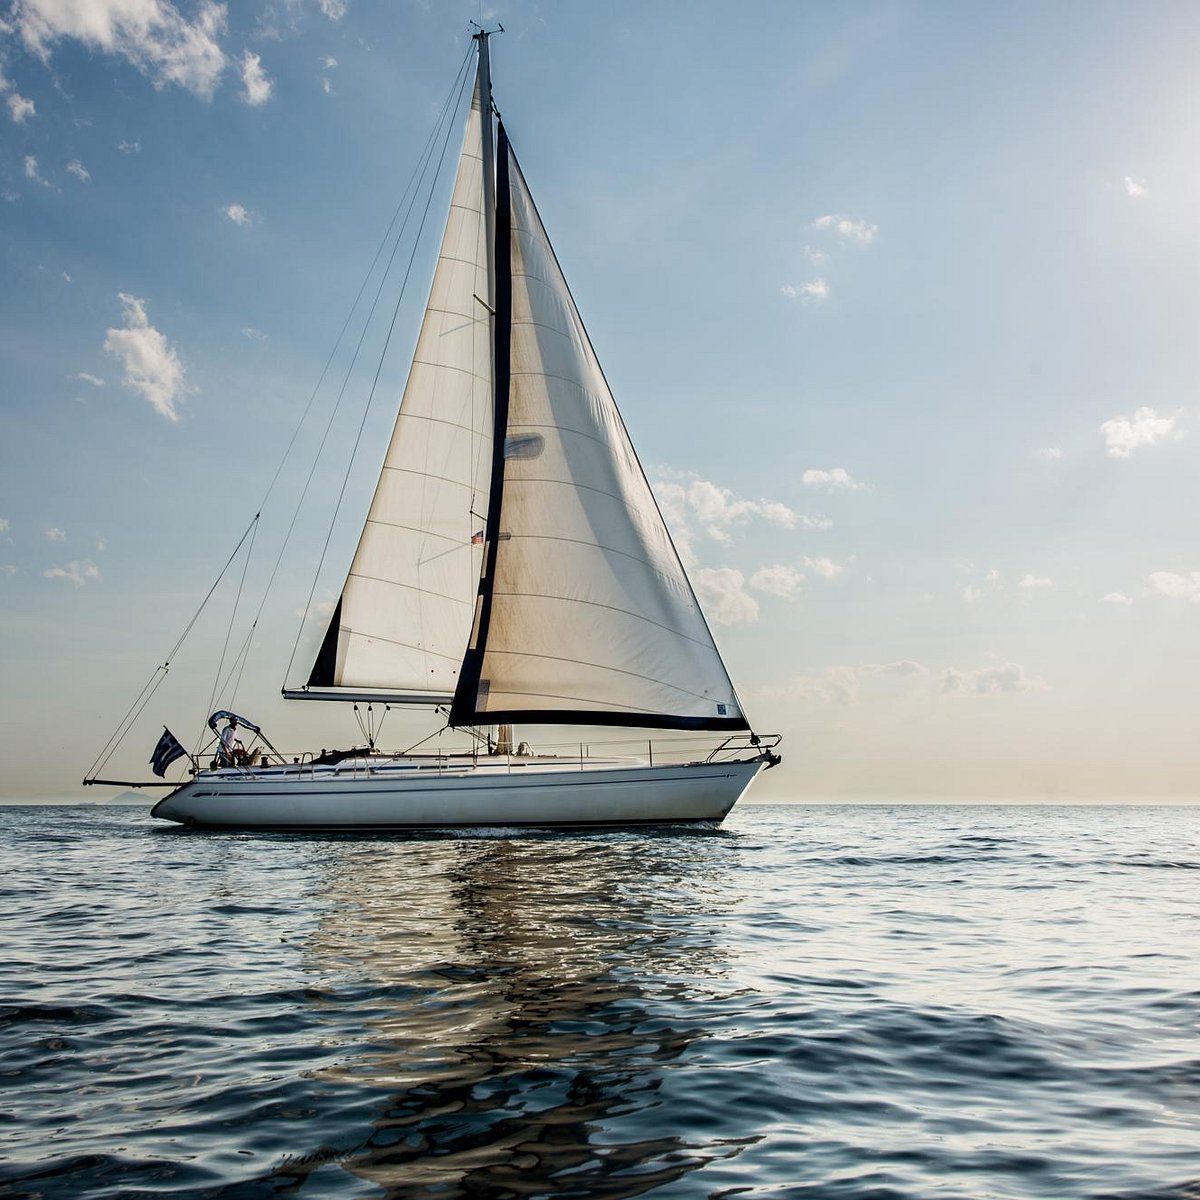 Sailing i want to. Парус all inclusive.